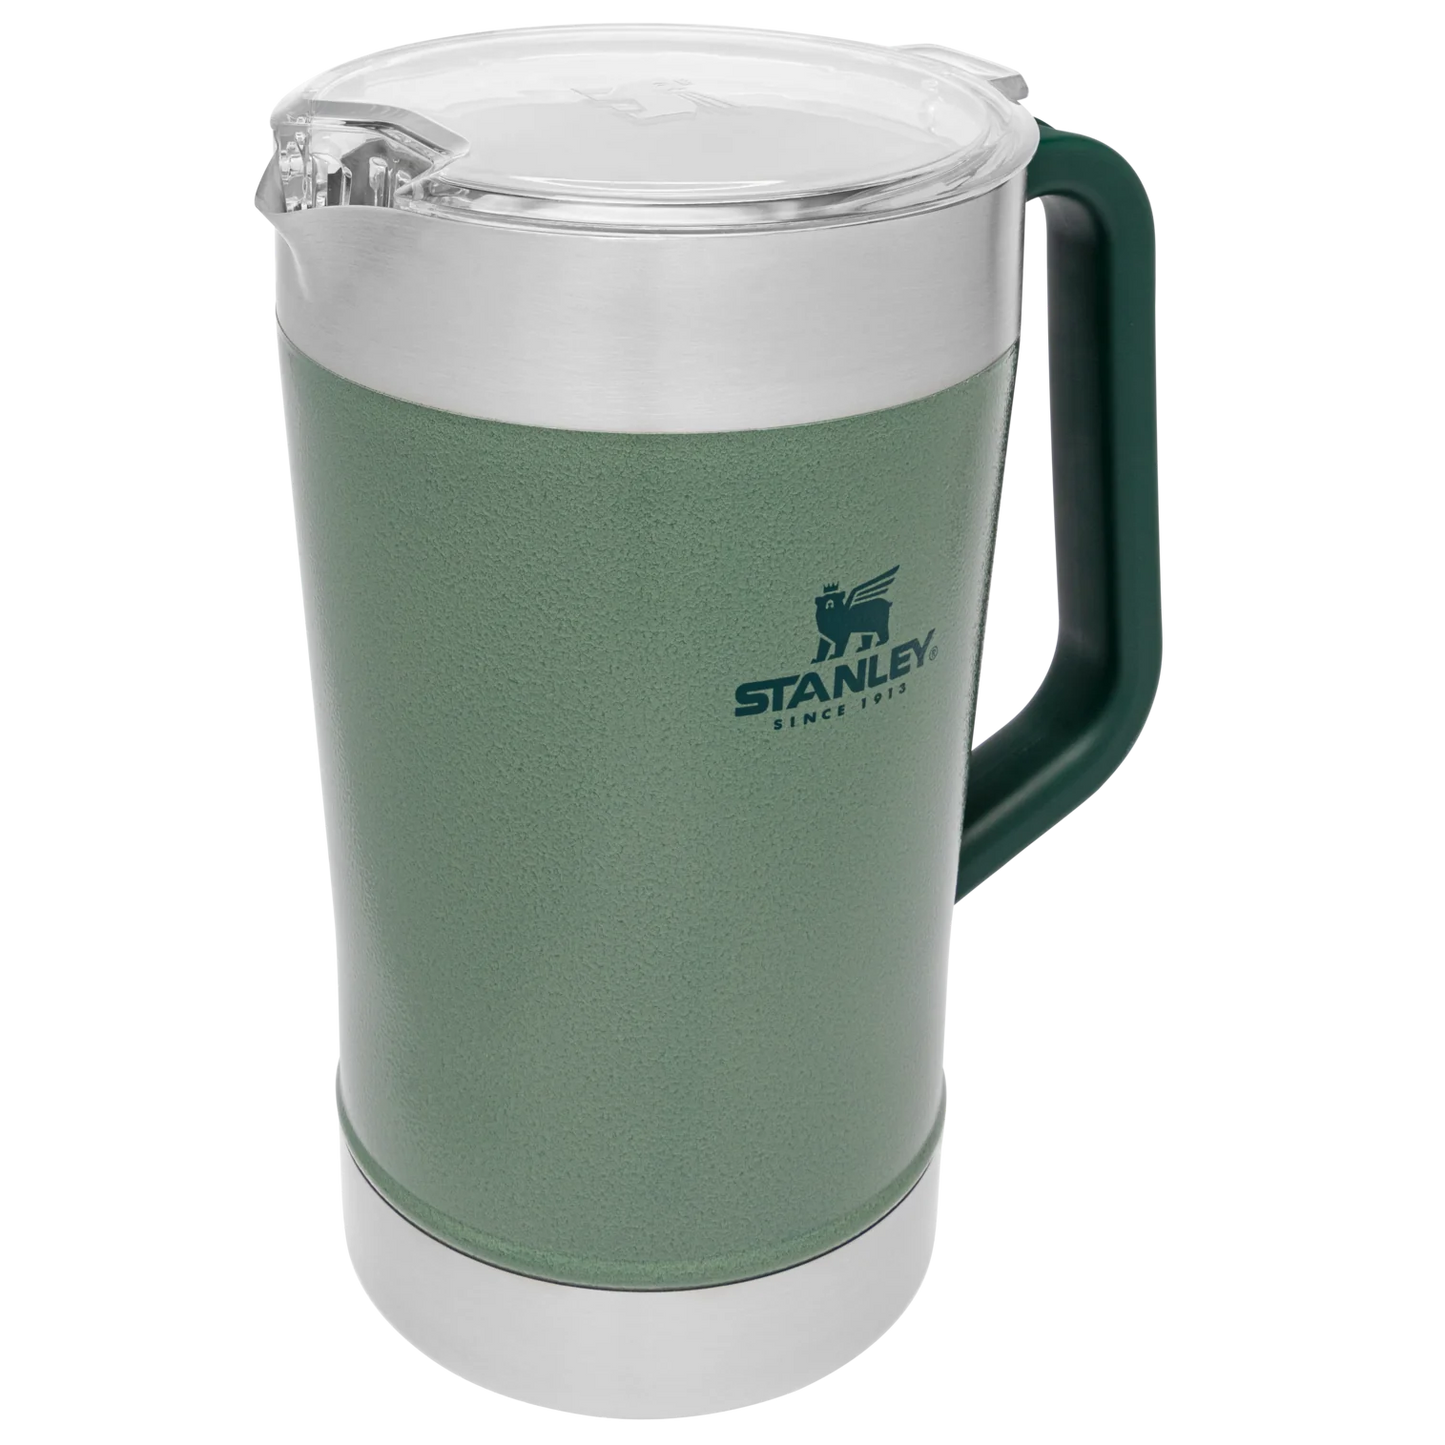 Stanley Classic Stay Chill Hammer Tone Green 64oz Pitcher 10-10341-310